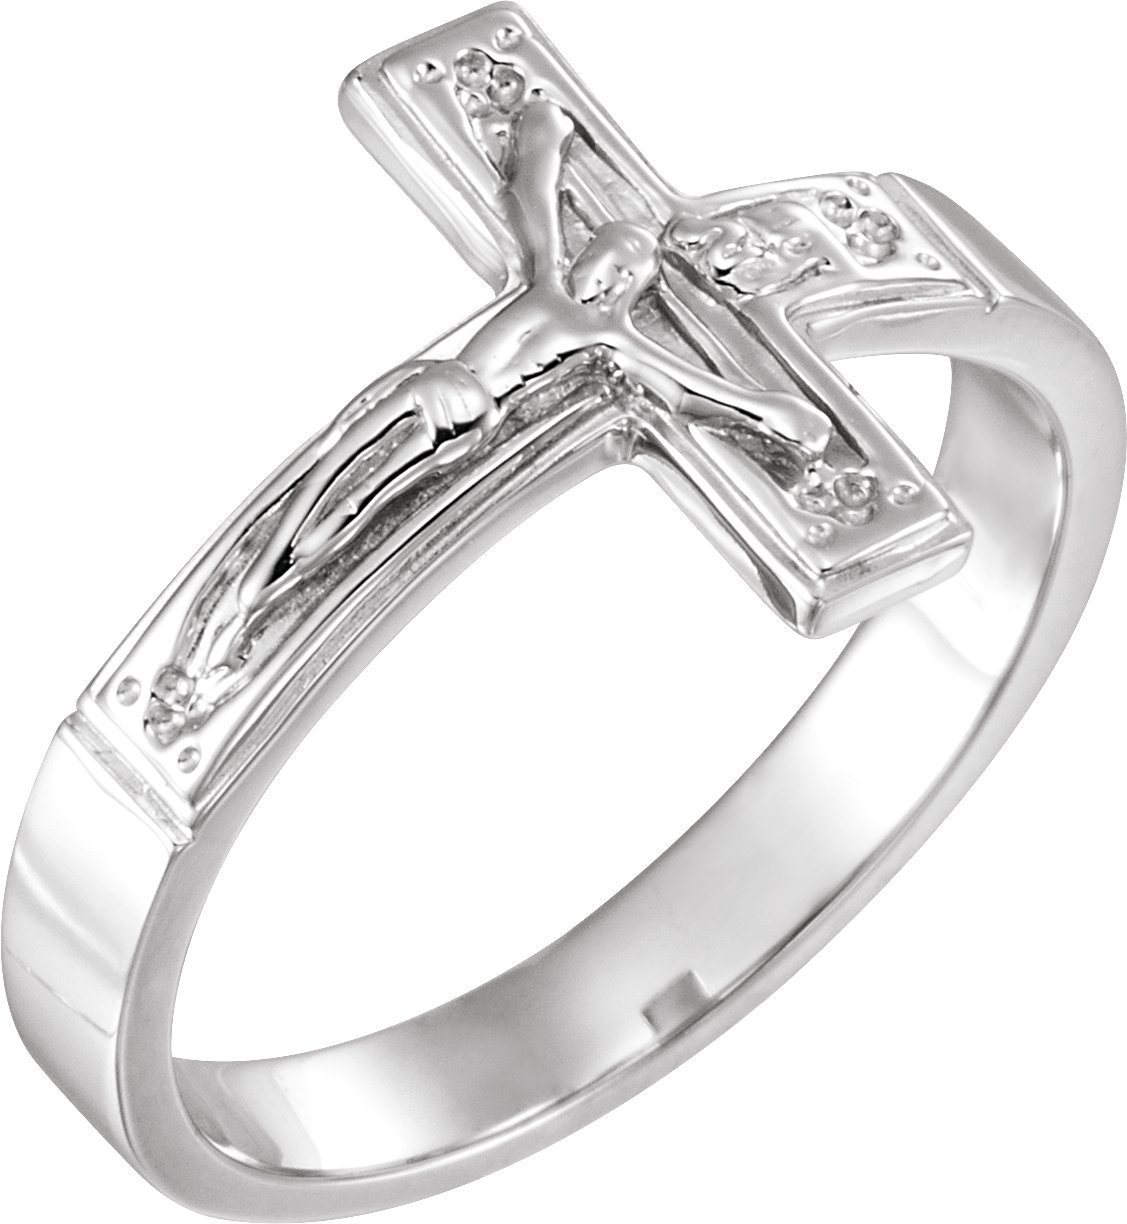 Sterling Silver 15 mm Crucifix Chastity Ring Size 10